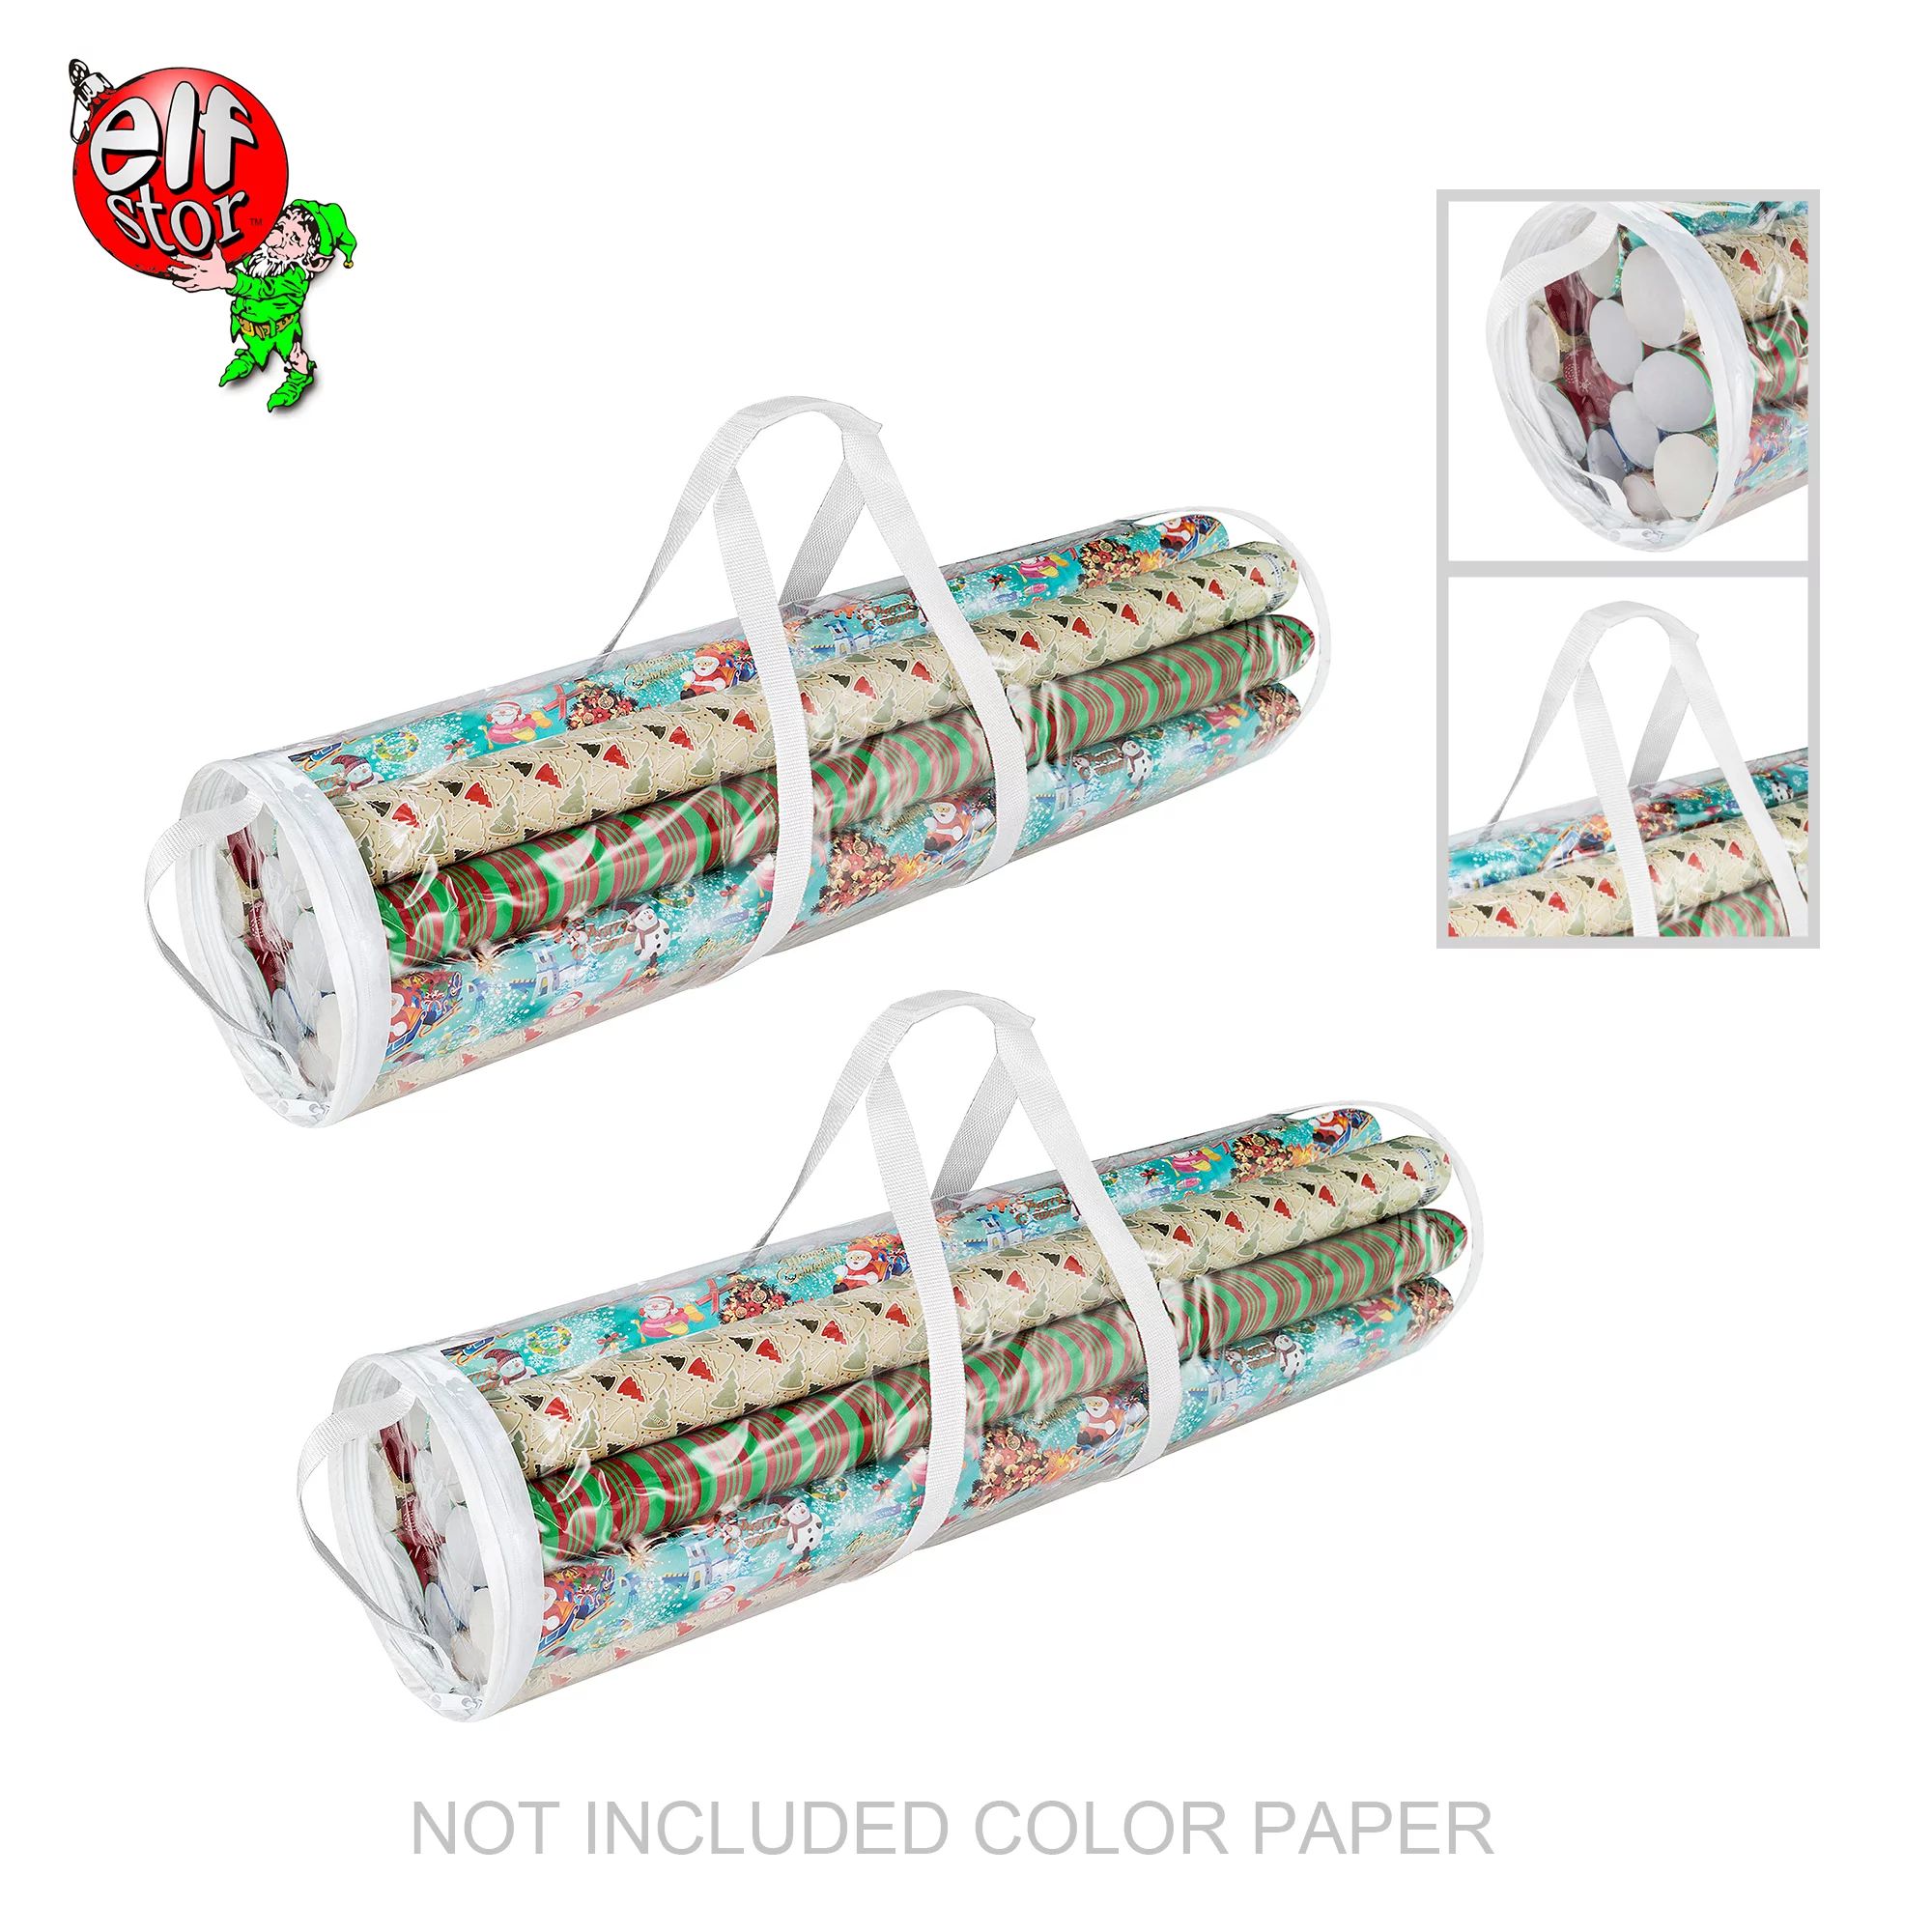 Elf Stor 83-DT5053 Gift Wrap Storage Bag for 31 Inch Rolls of Paper | 2 Pack, Clear | Walmart (US)